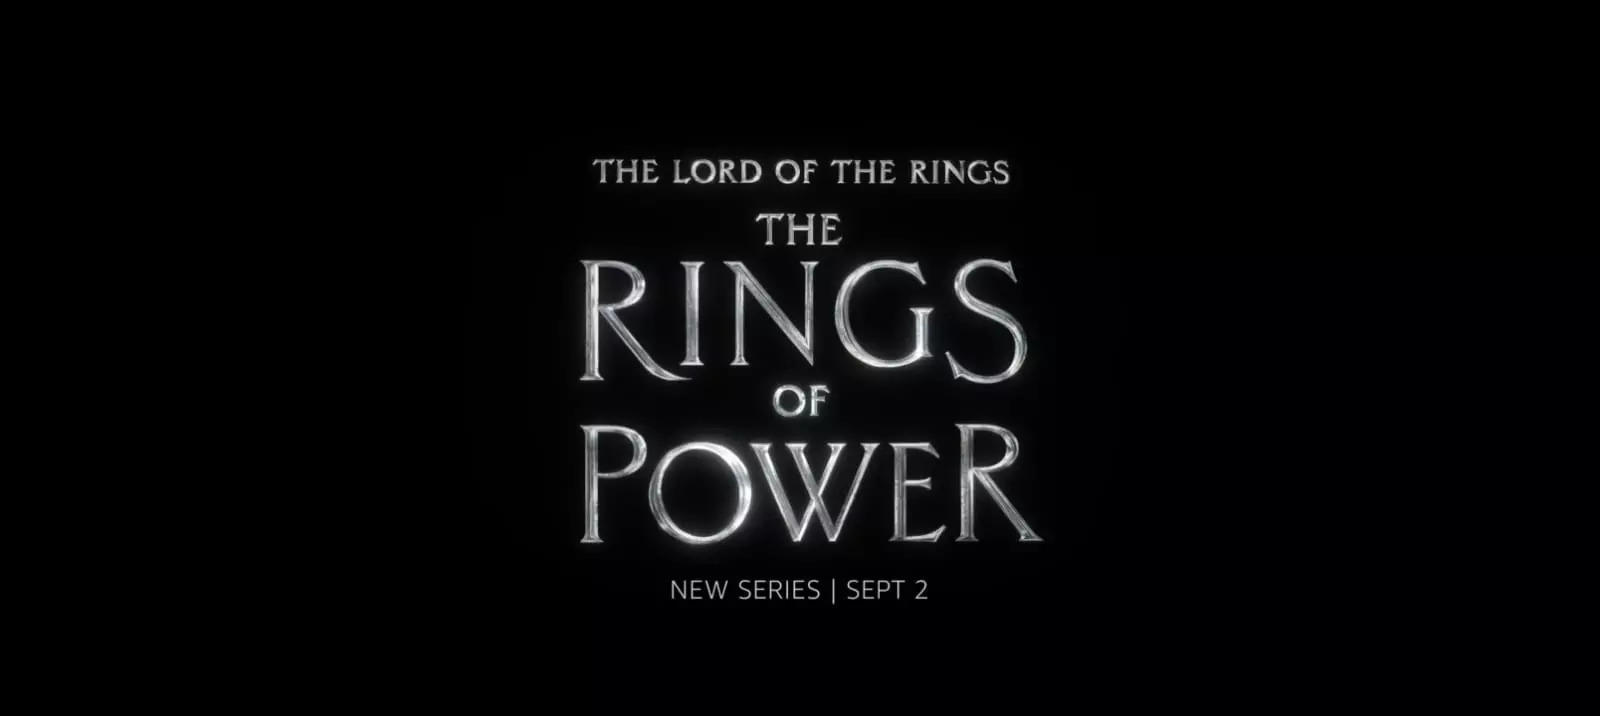 The Lord of the Rings: The Rings of Power episode 7 release date: Prime Video plans that will allow you to watch the series in India.